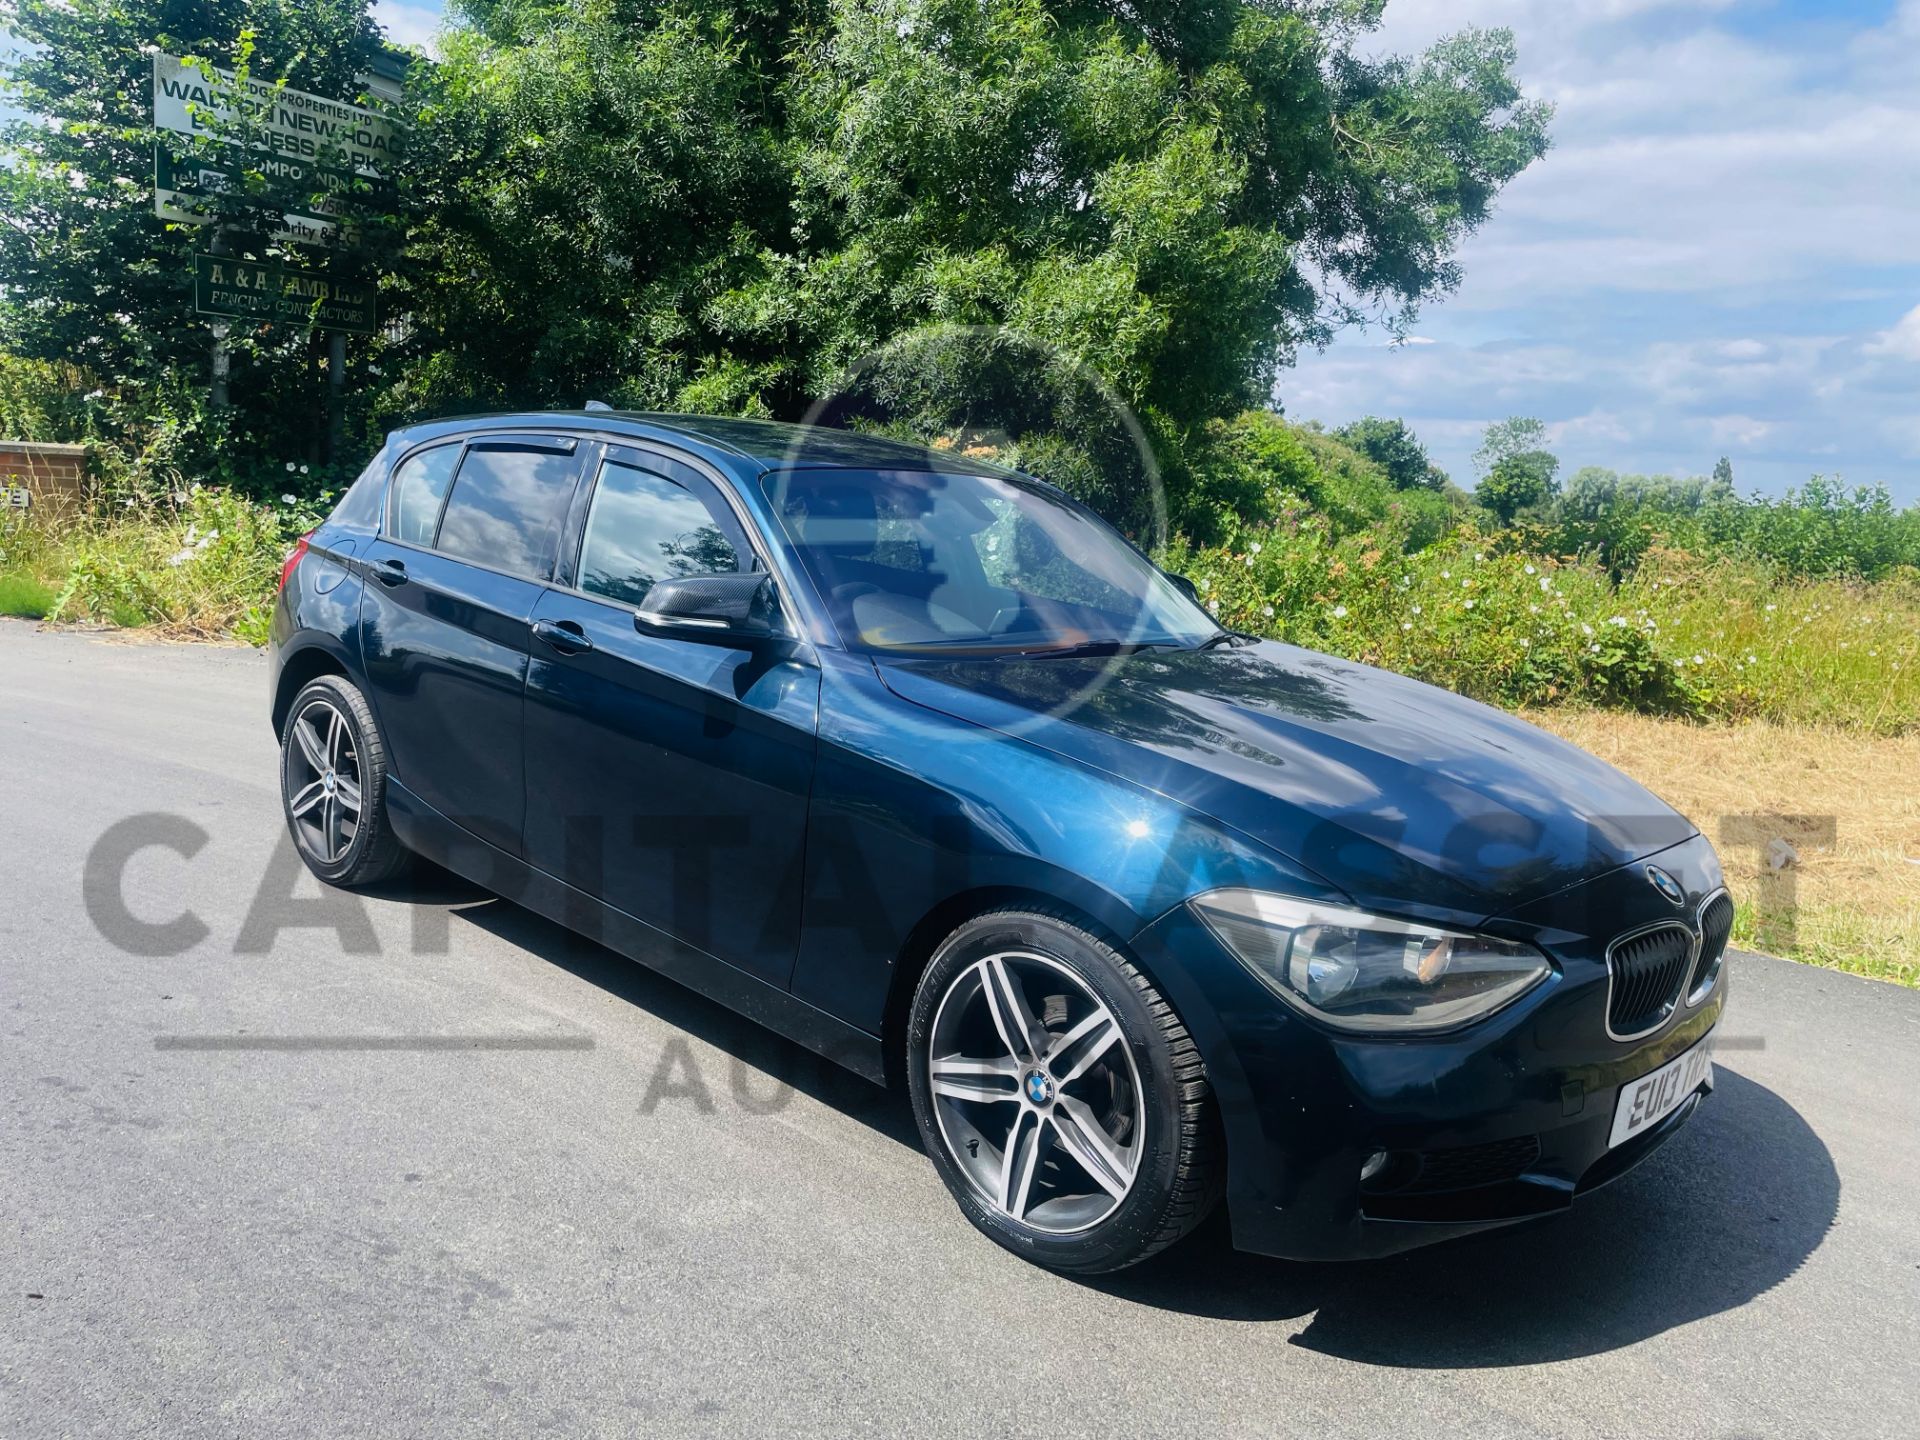 (ON SALE) BMW 114i *SPORT EDITION* 5 DOOR HATCHBACK (2013 - NEW MODEL) 1.6 PETROL - 6 SPEED *AIR CON - Image 3 of 44